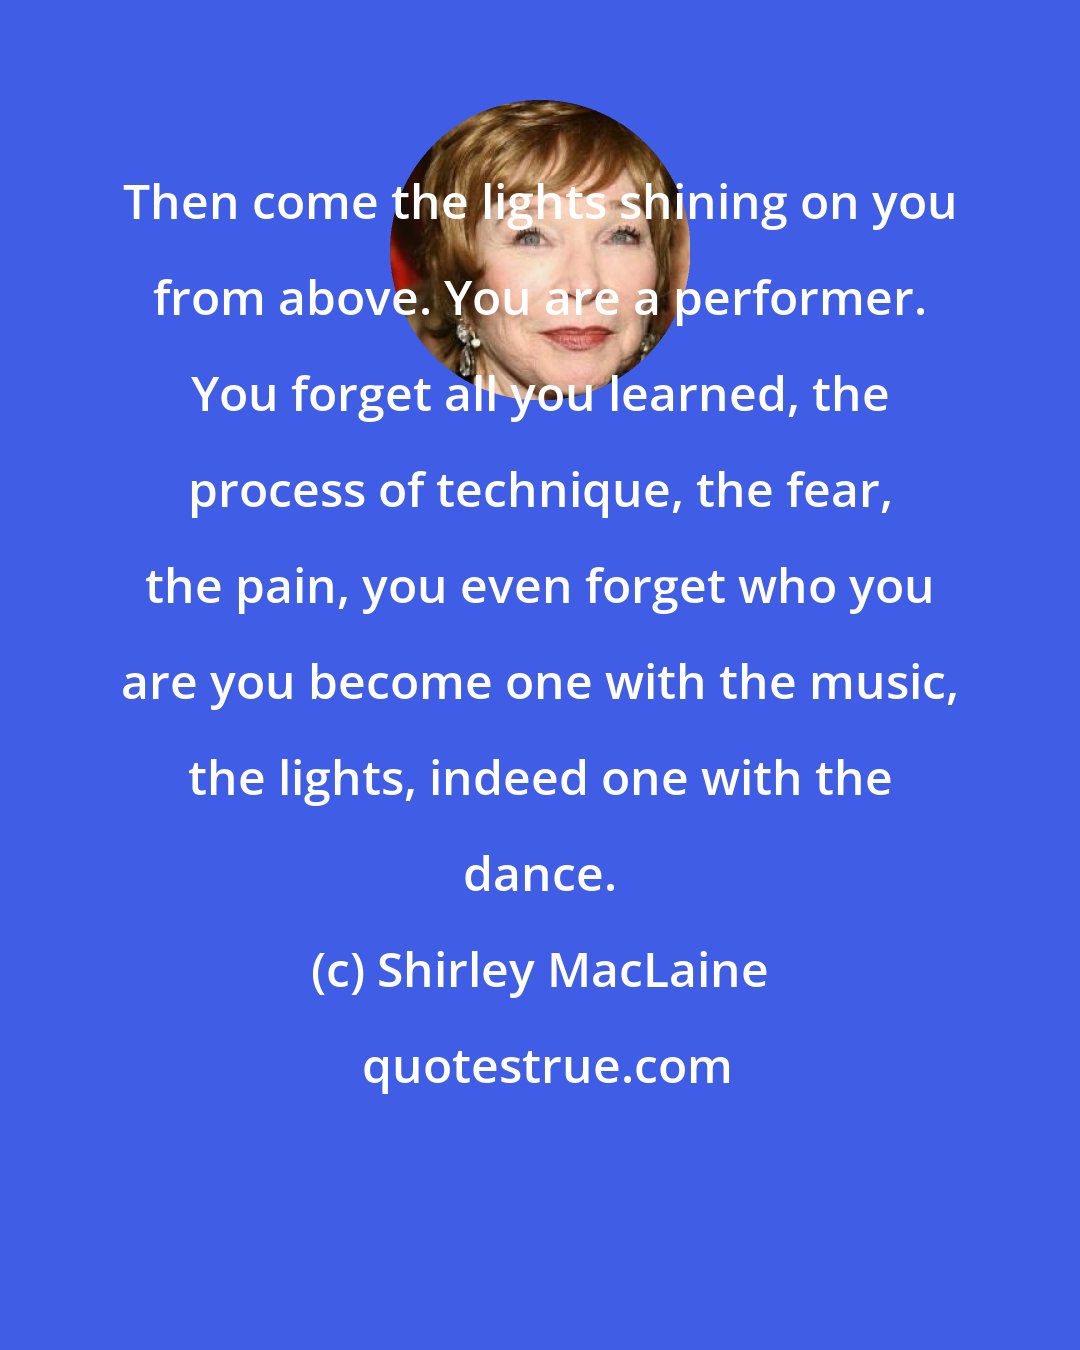 Shirley MacLaine: Then come the lights shining on you from above. You are a performer. You forget all you learned, the process of technique, the fear, the pain, you even forget who you are you become one with the music, the lights, indeed one with the dance.